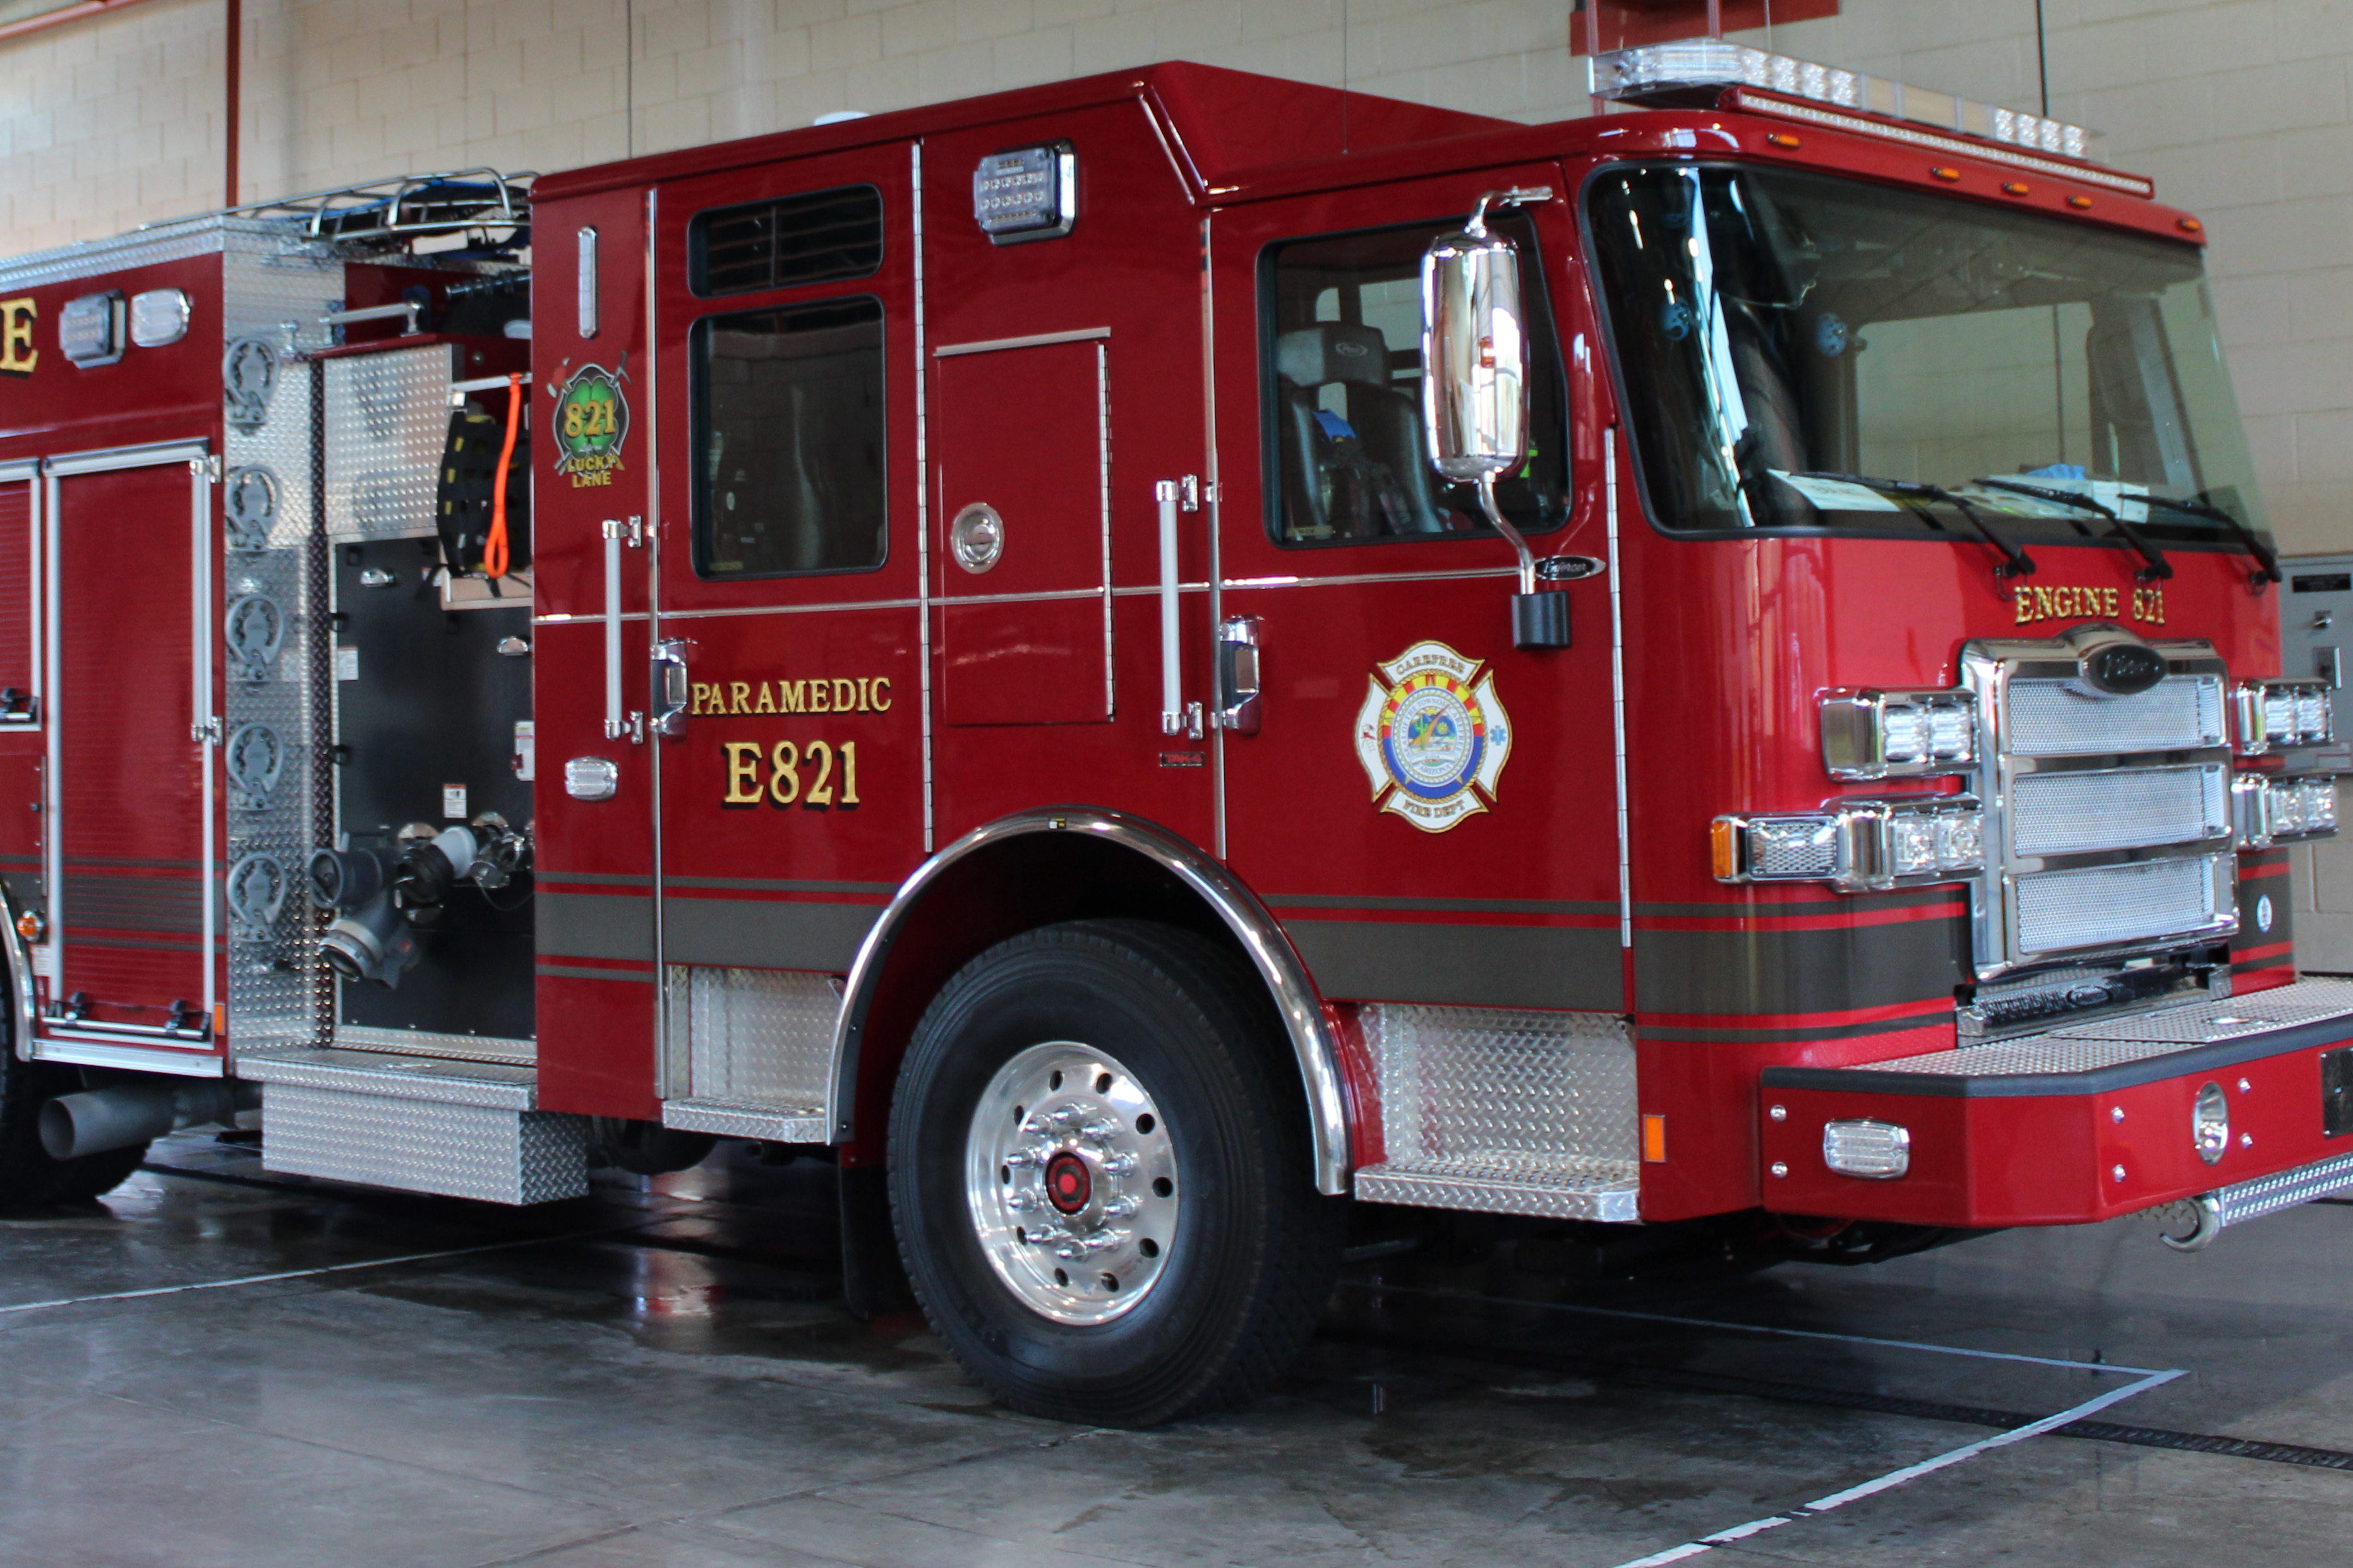 Picture of Engine 821 of the Carefree Fire Department.